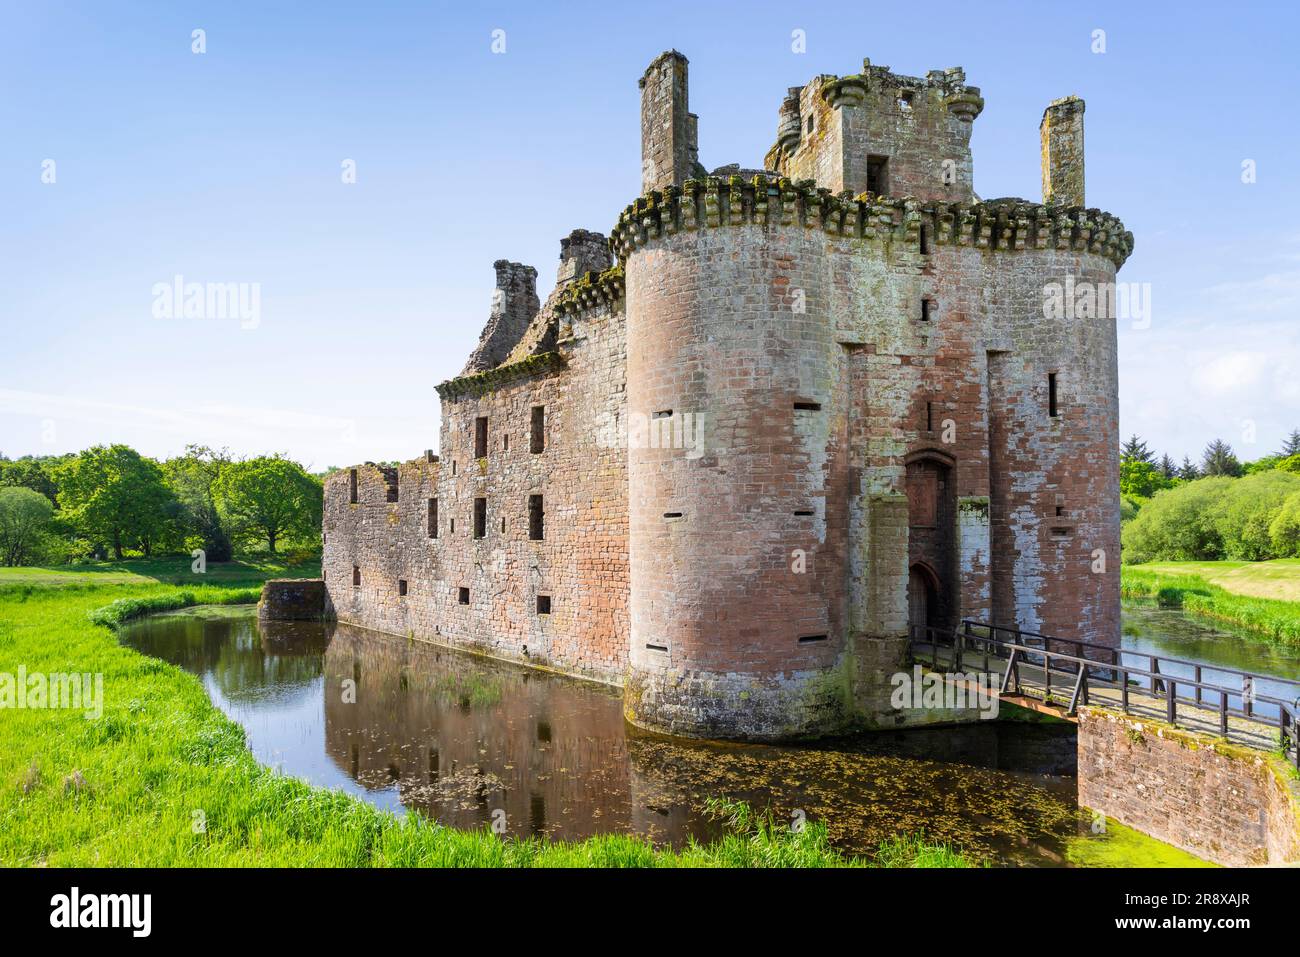 Caerlaverock Castle Scotland a triangular castle with a moat in Dumfries and Galloway Scotland UK GB Europe Stock Photo